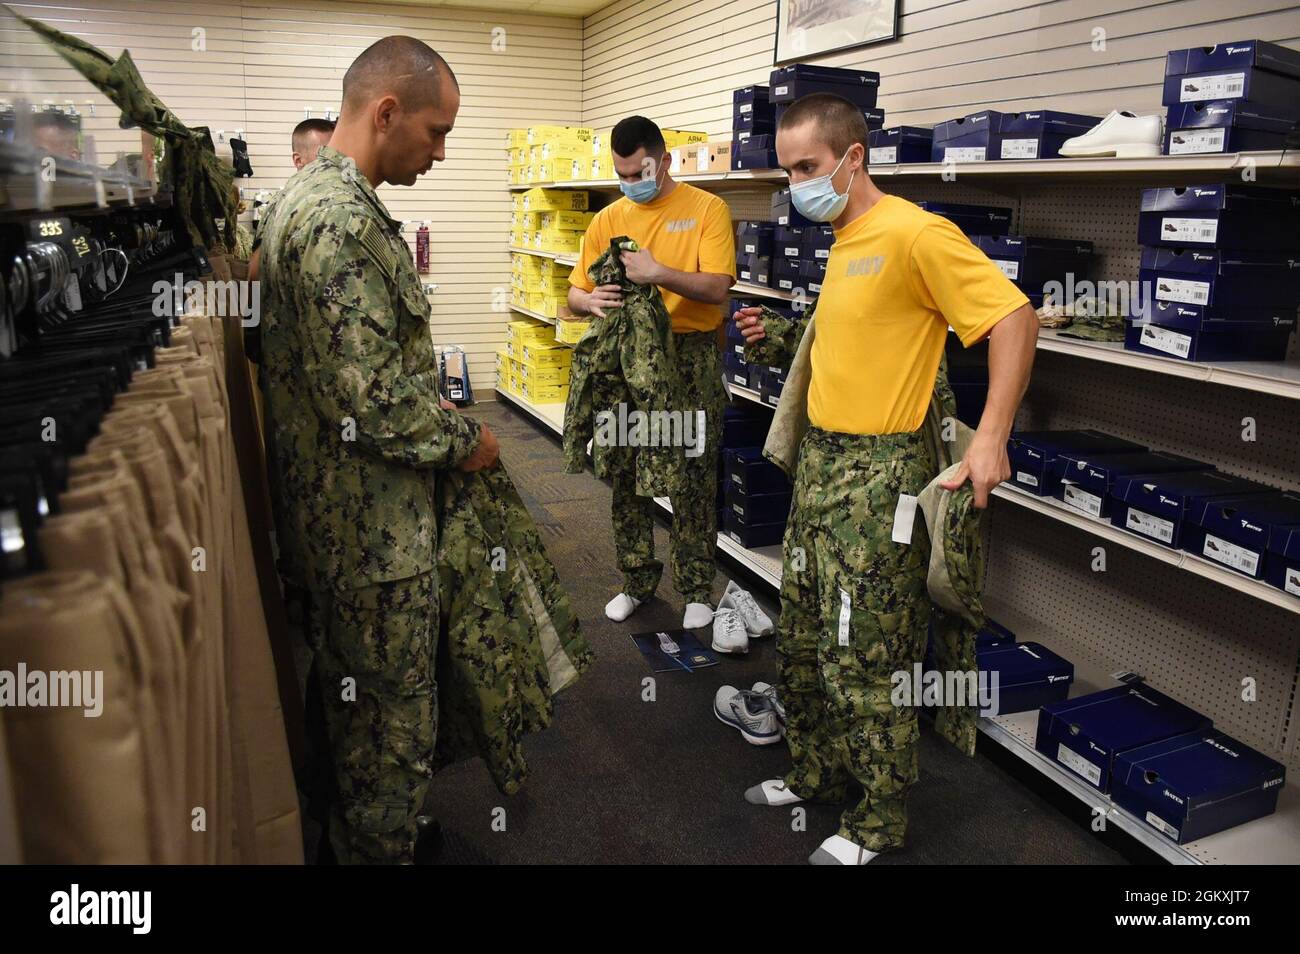 Senior Chief Gas Turbine Systems Technician Juan Rosa, a Recruit Division Commander (RDC) assigned to Officer Training Command Newport (OTCN), Rhode Island, observes an Officer Development School (ODS) class 21070 student test fit the Navy Working Uniform during an initial uniform issue, July 20. ODS provides staff corps officers and several restricted line designators with training necessary to prepare them to function in their role as newly commissioned Naval officers. Stock Photo